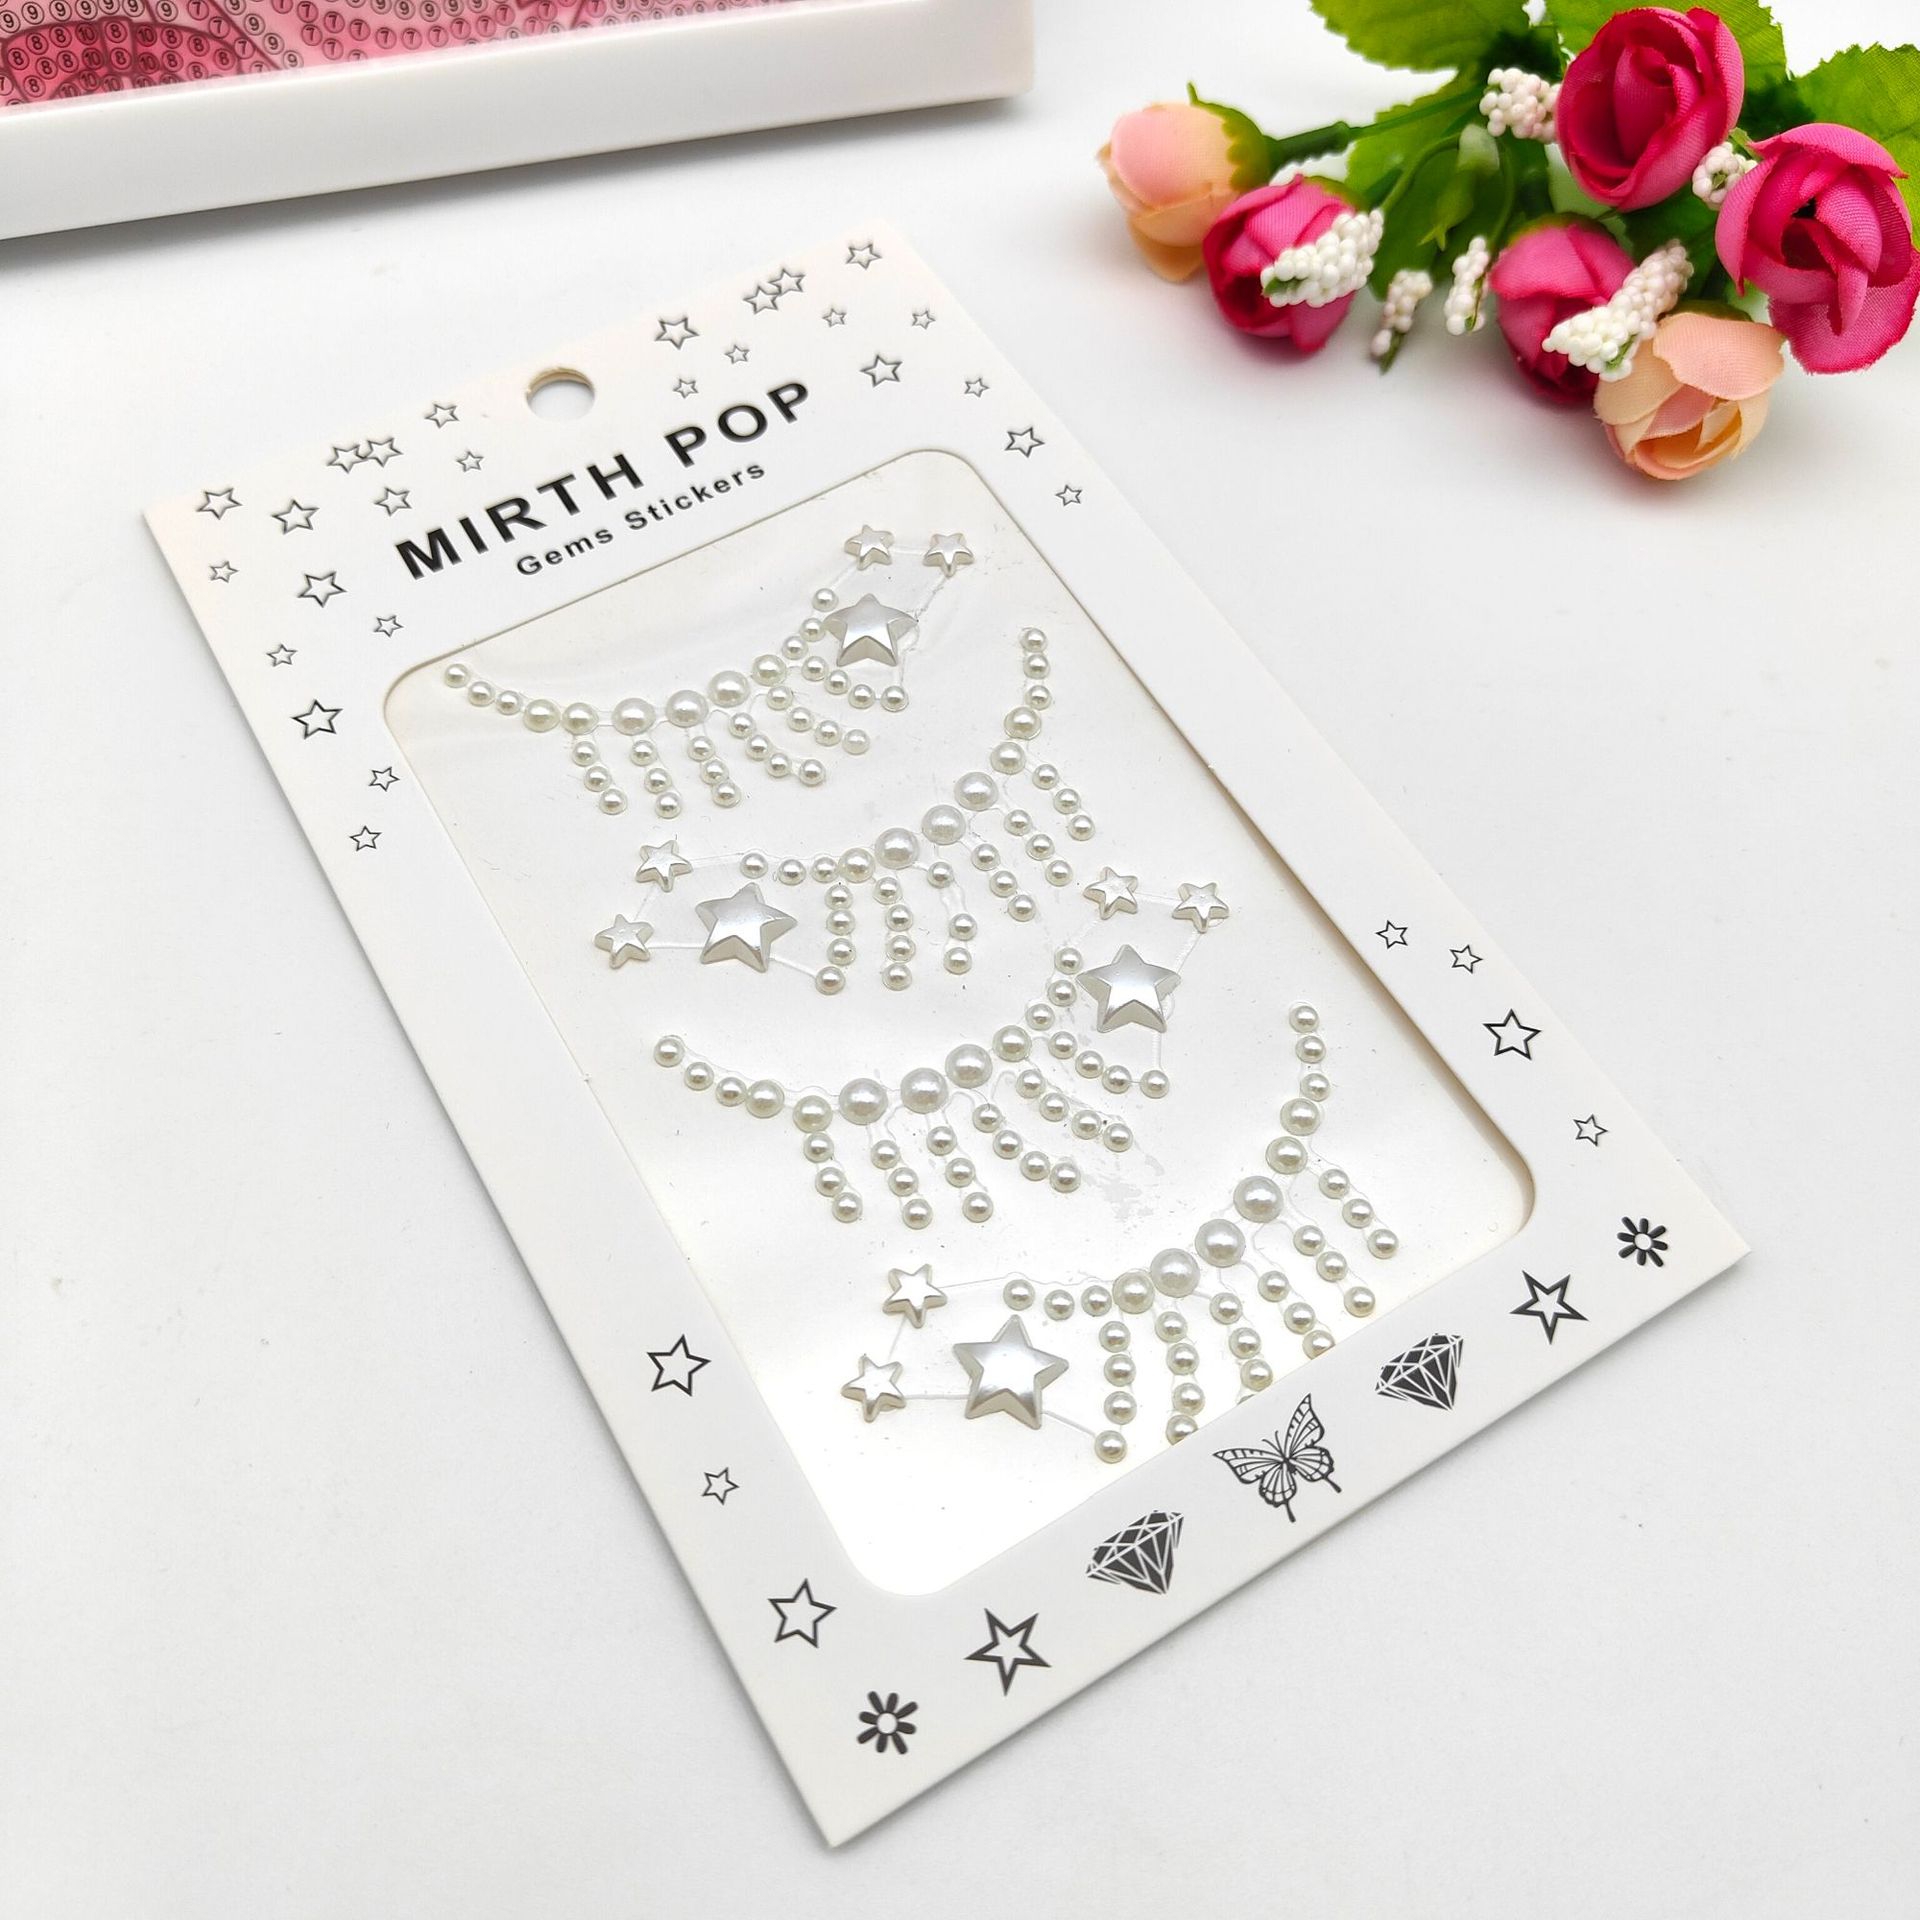 Stick-on Crystals Face Makeup Stickers Face Pearl Ornament Eye Makeup Light Diamond Tear Mole Diamond Rhinestones Paster Face Stage Makeup Makeup Stickers